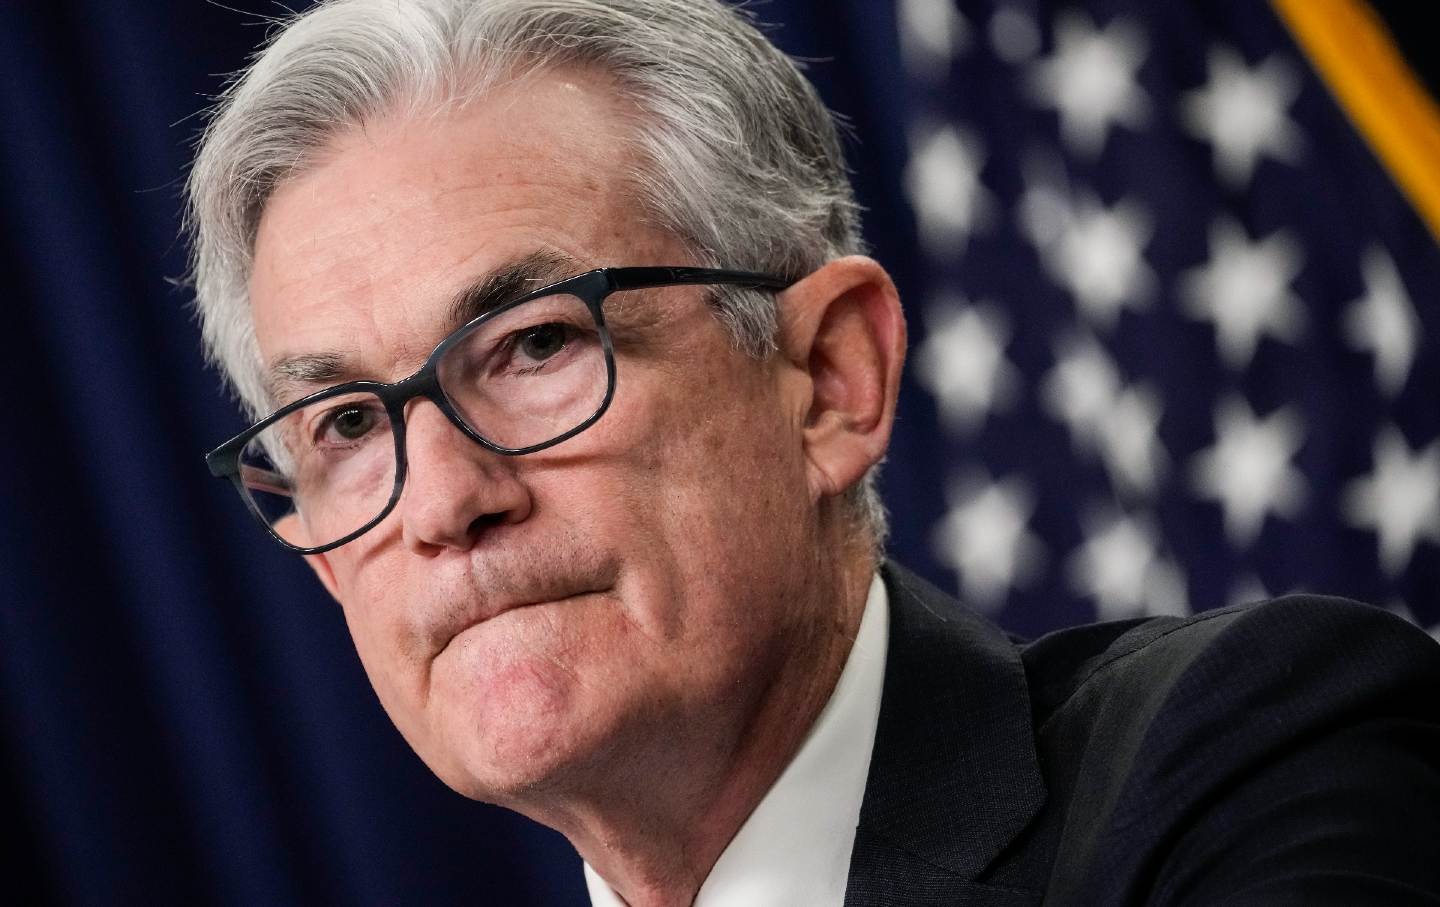 Federal Reserve Board Jerome Powell at a news conference after a Federal Open Market Committee meeting.